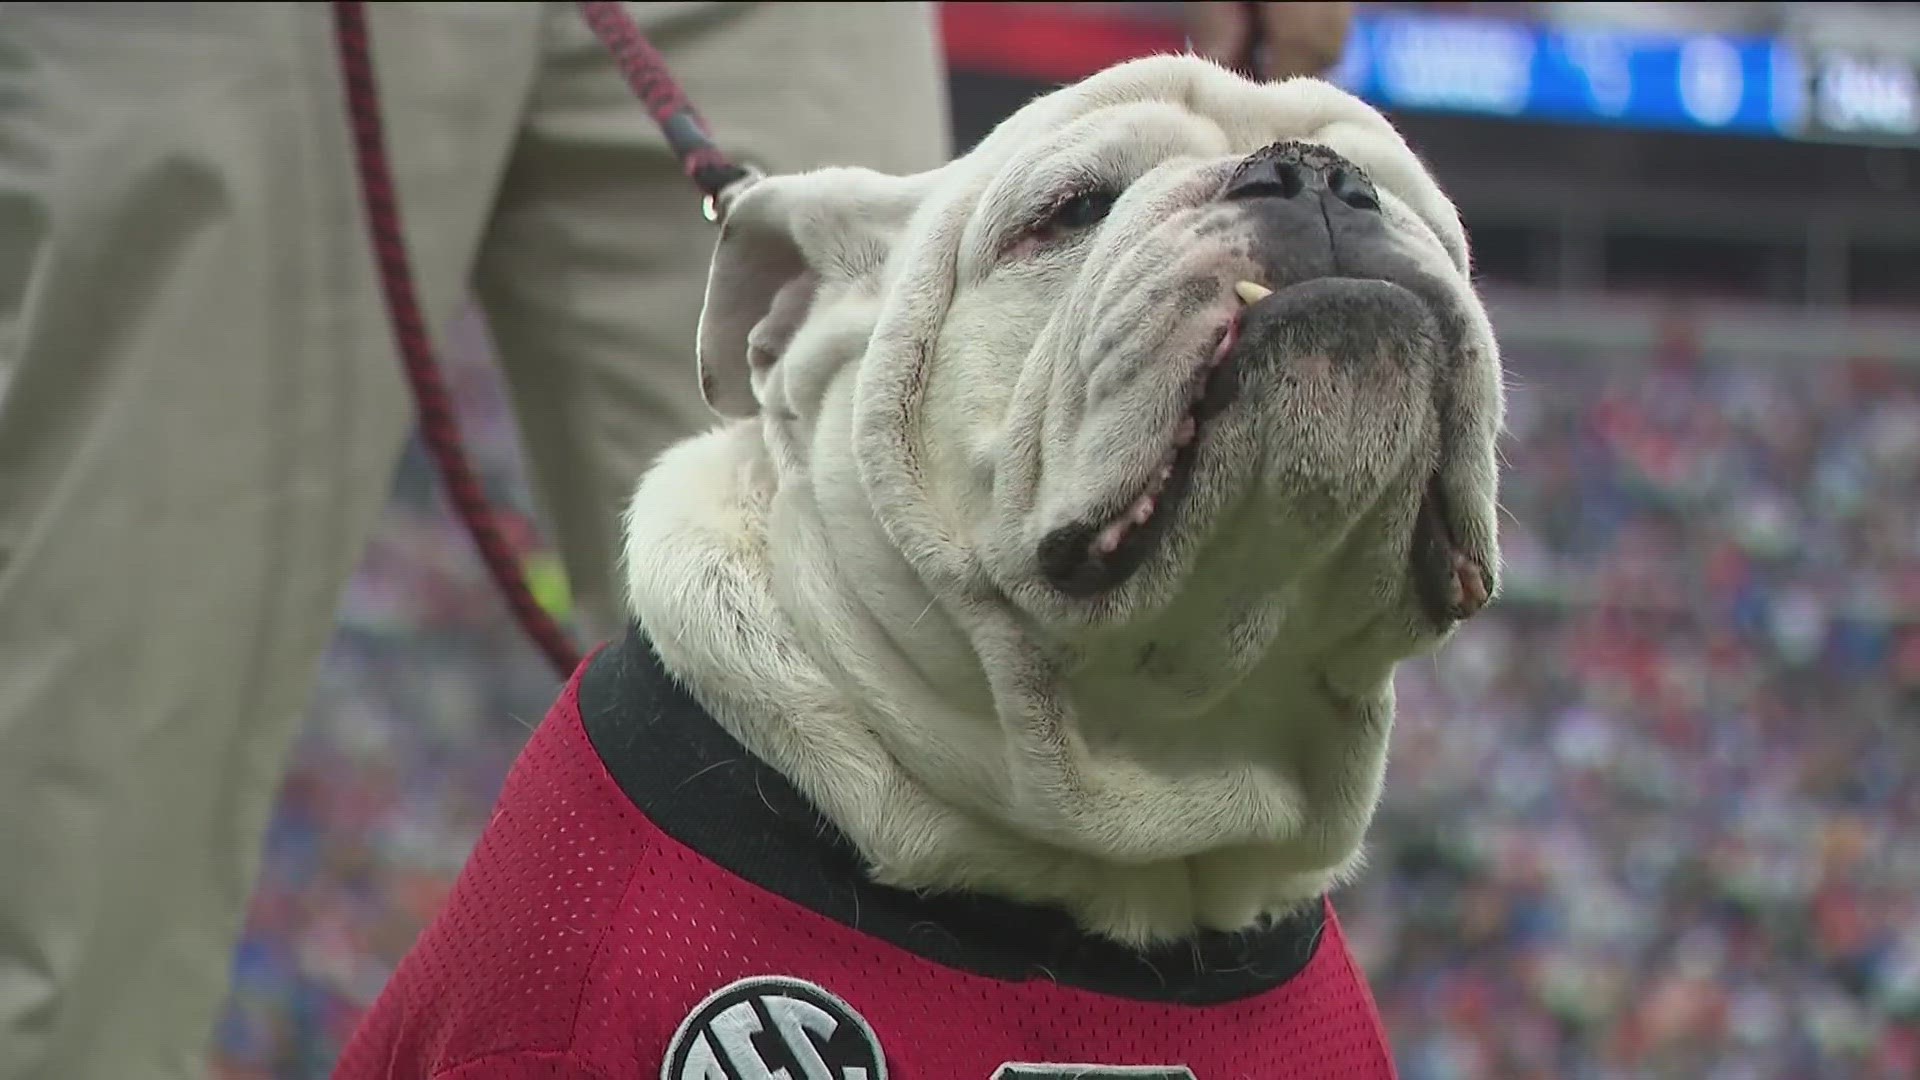 The bulldog, lovingly known as Que, died peacefully at his home in Savannah.